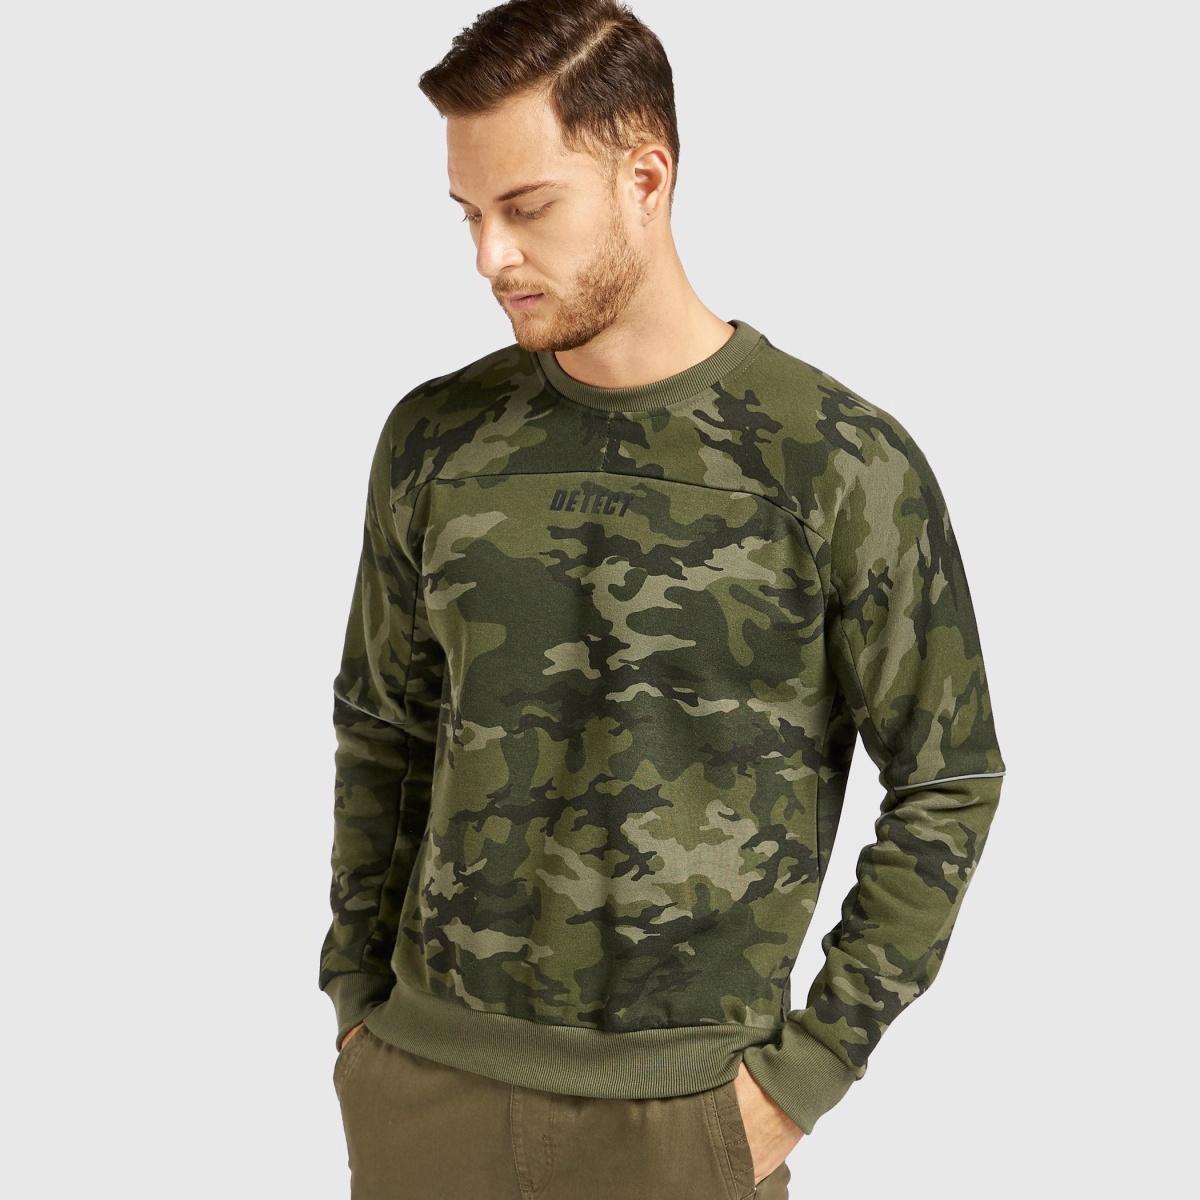 Slim Fit All-Over Camouflage Print Sweatshirt with